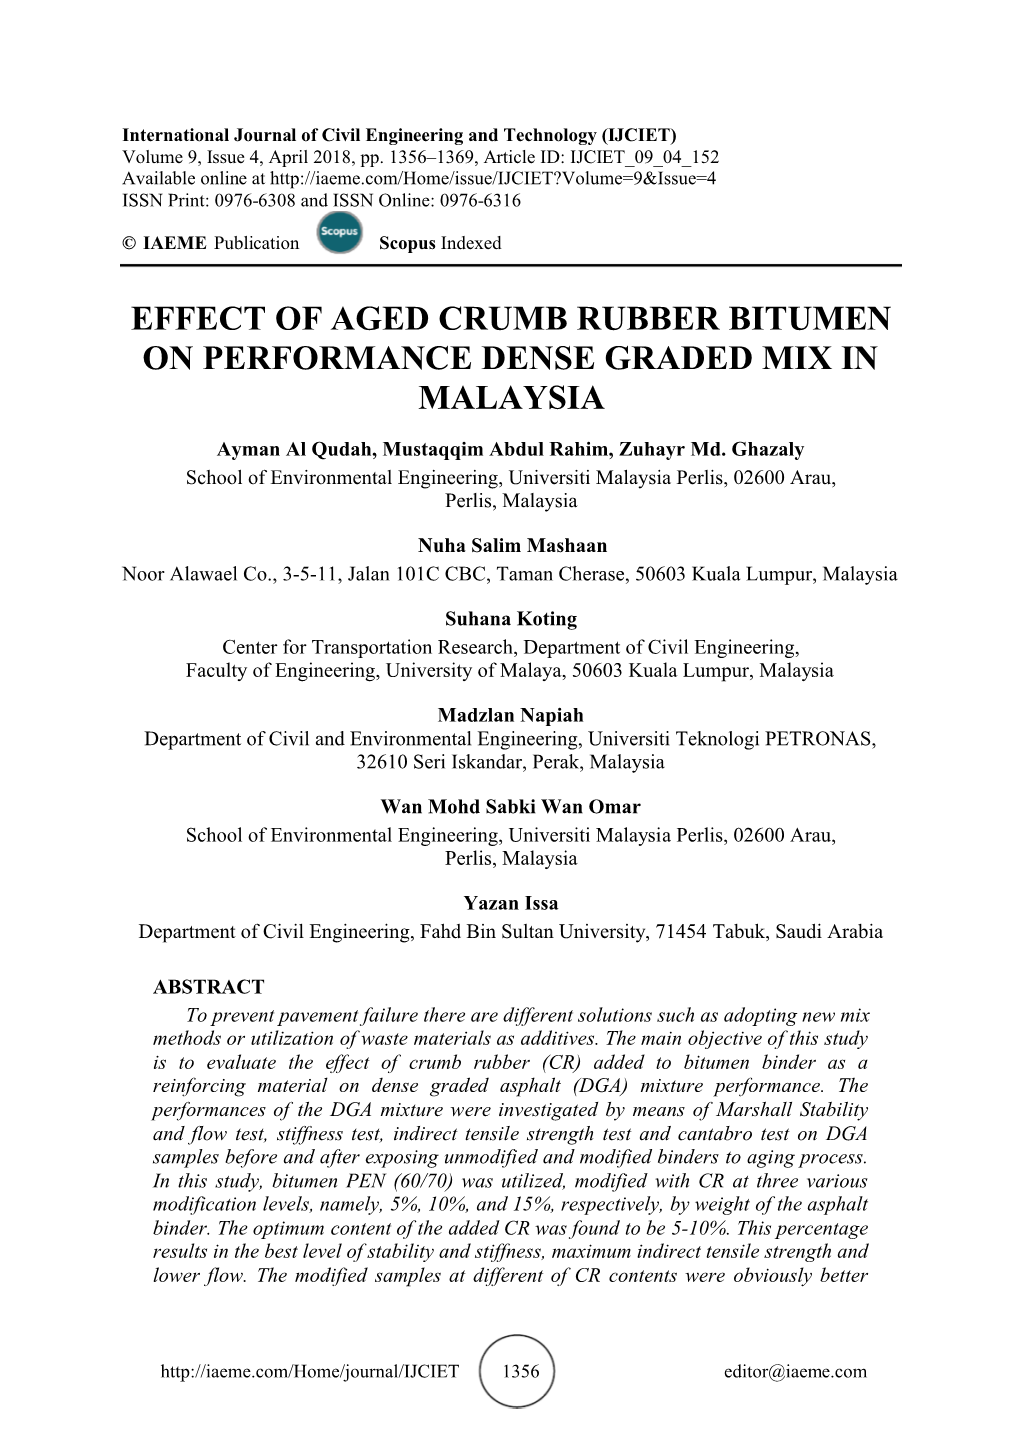 Effect of Aged Crumb Rubber Bitumen on Performance Dense Graded Mix in Malaysia